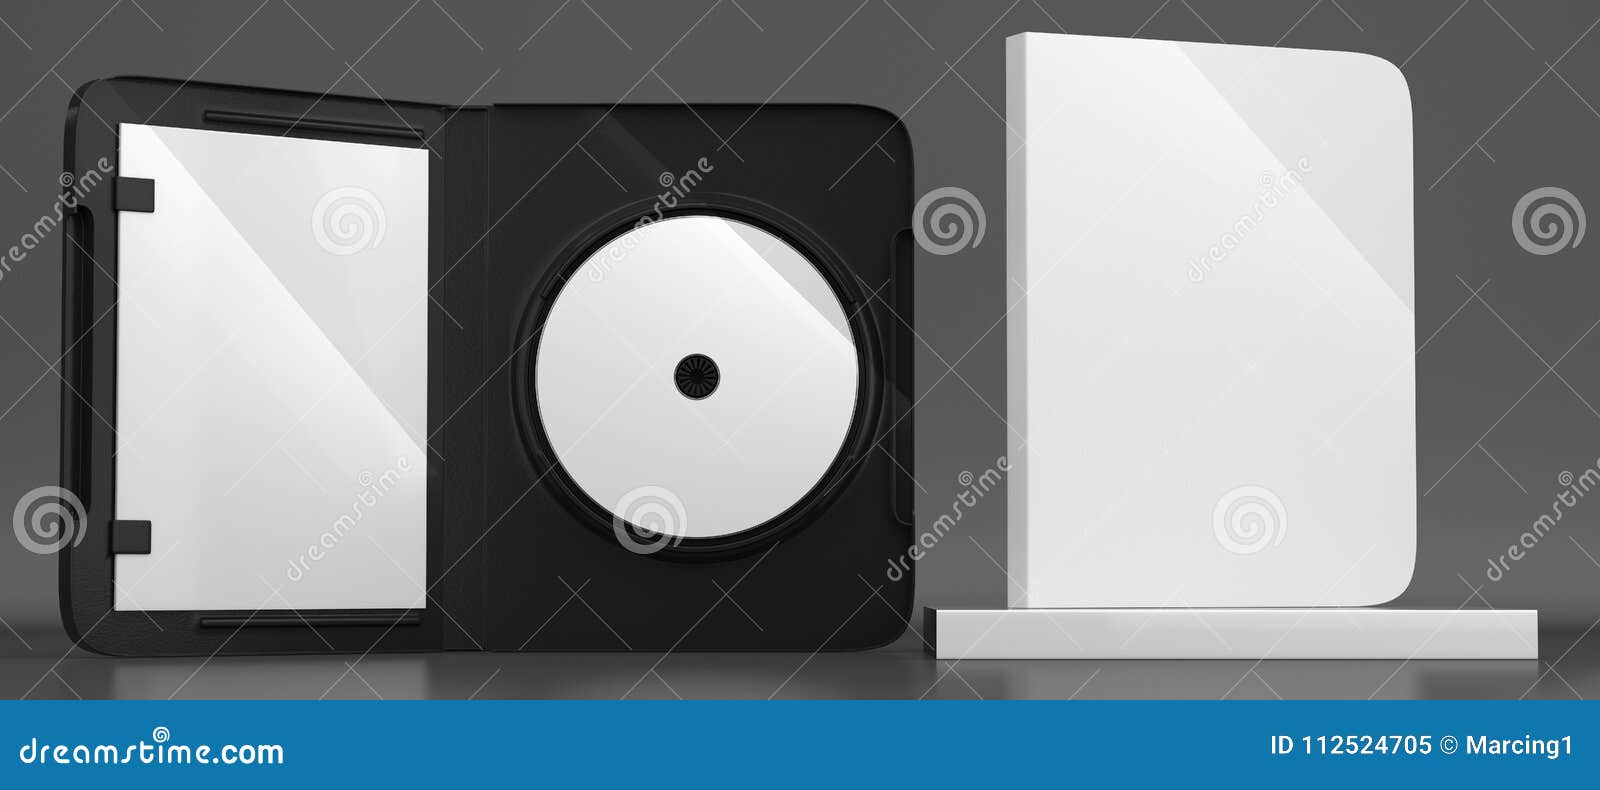 Download CD DVD Disc Plastic Box Mockup. Front View. Stock ...